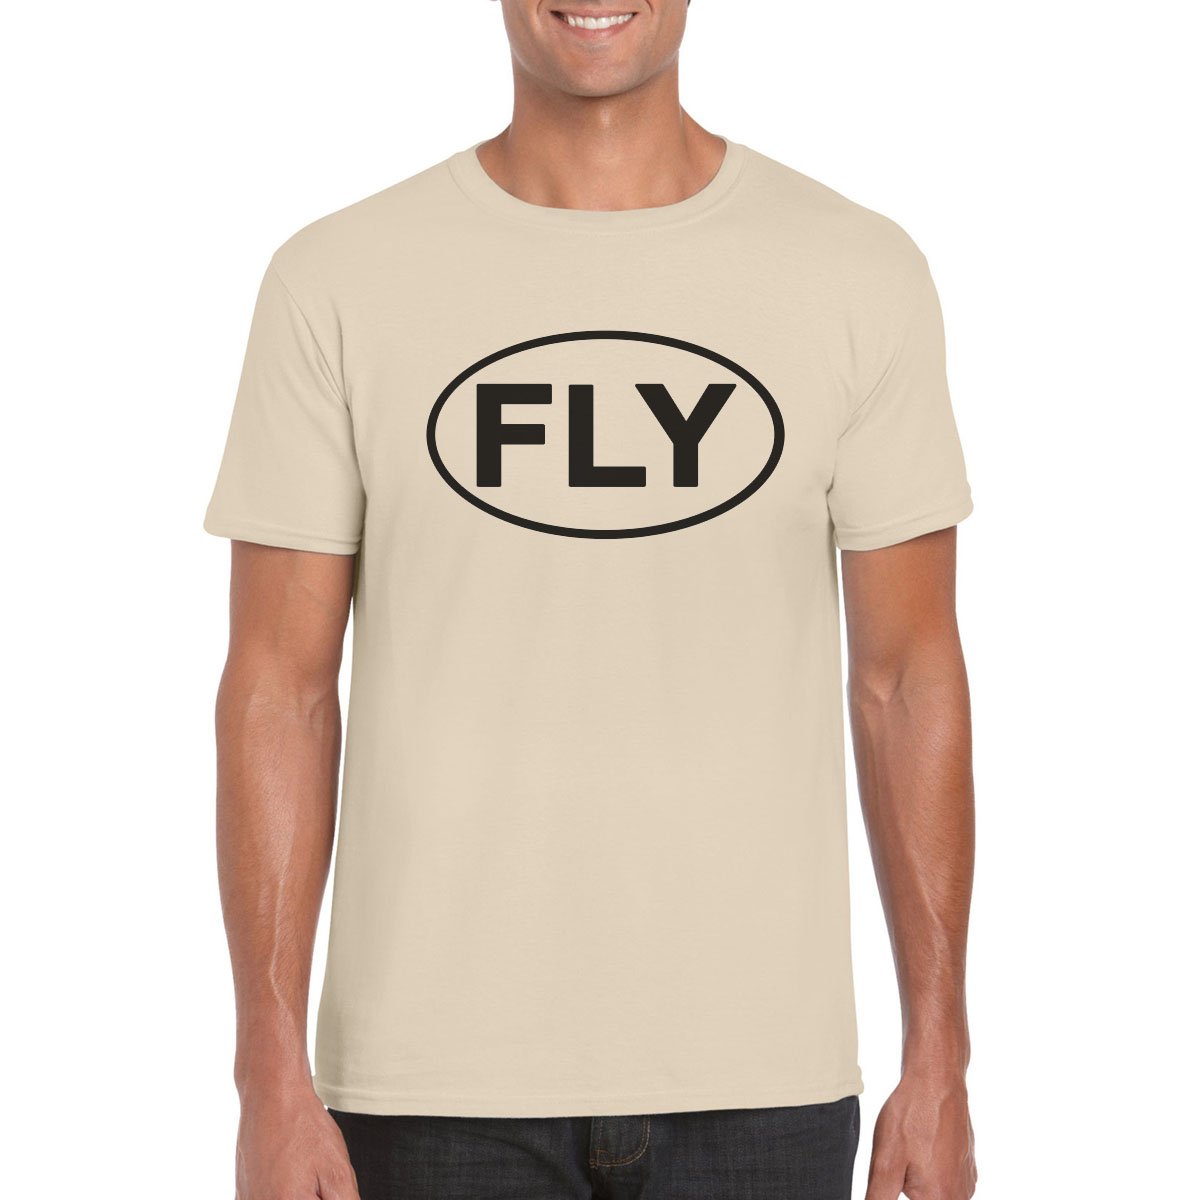 FLY Semi-Fitted Unisex T-Shirt